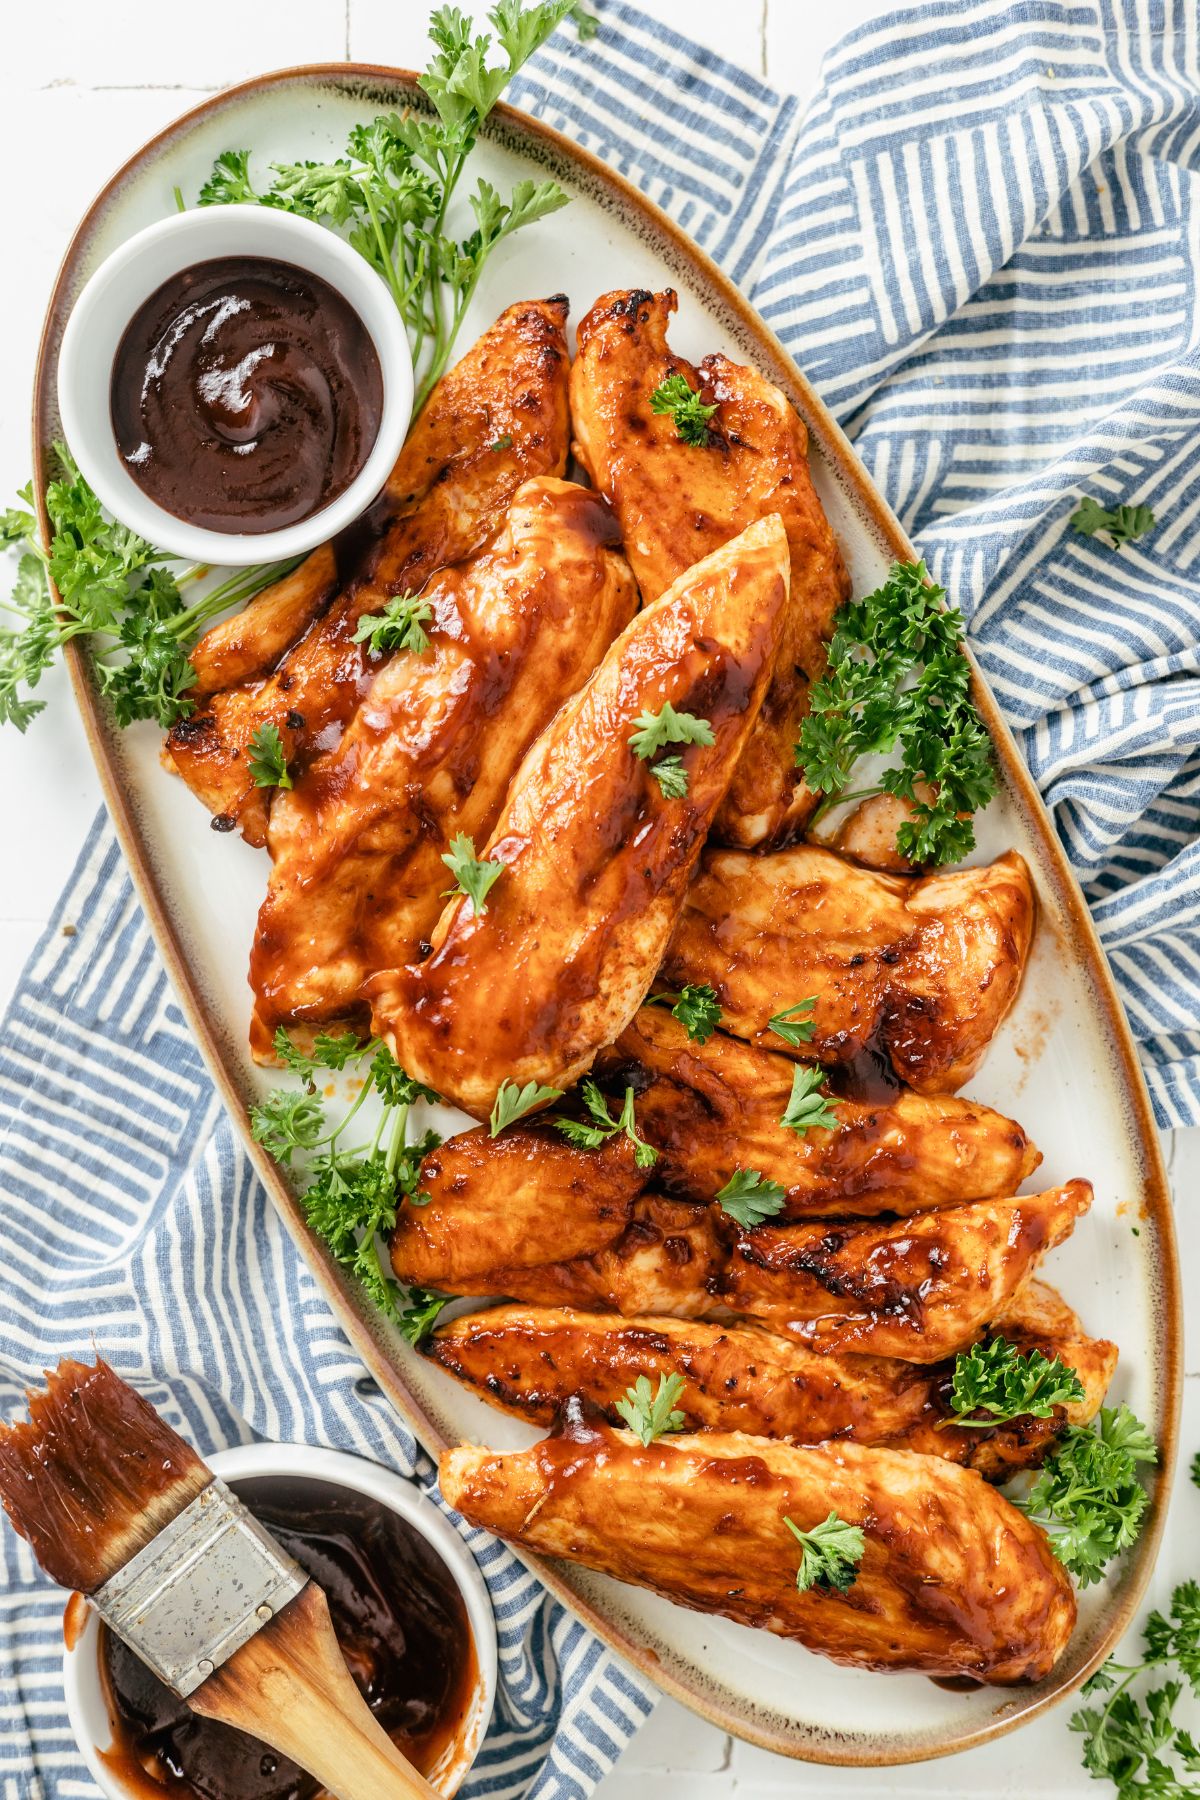 Tender and succulent BBQ chicken tenders artistically arranged on a plate, garnished with fresh parsley for a vibrant touch.